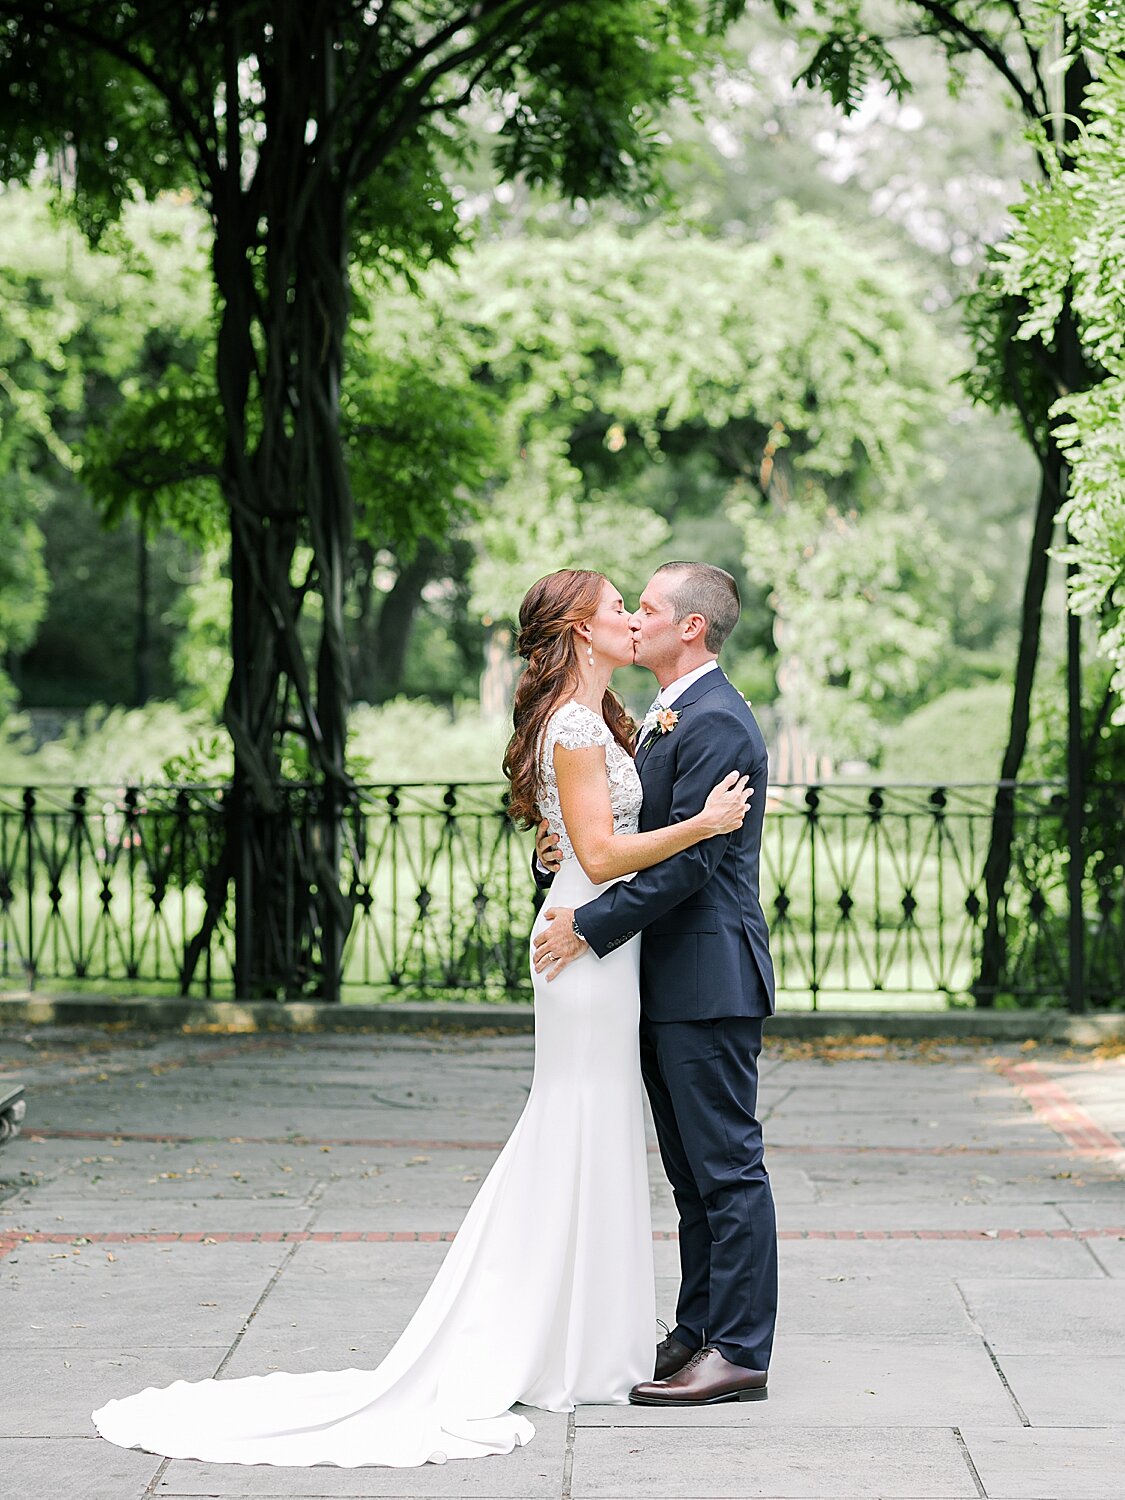 first kiss as husband and wife | Asher Gardner Photography | Elopement at the Central Park Conservatory Gardens